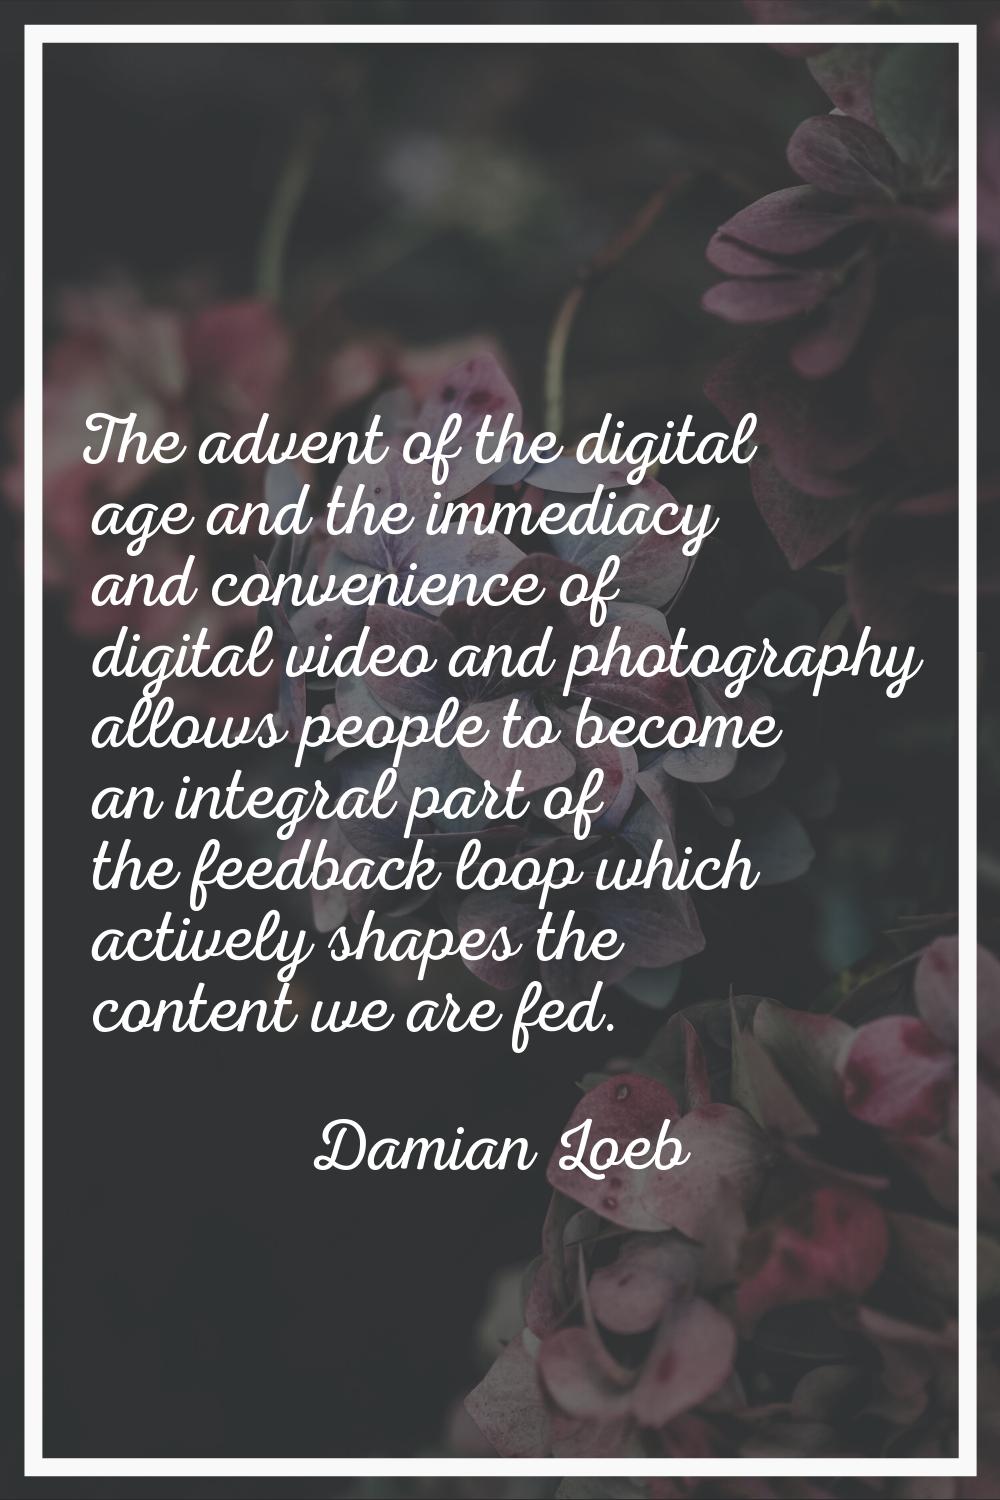 The advent of the digital age and the immediacy and convenience of digital video and photography al